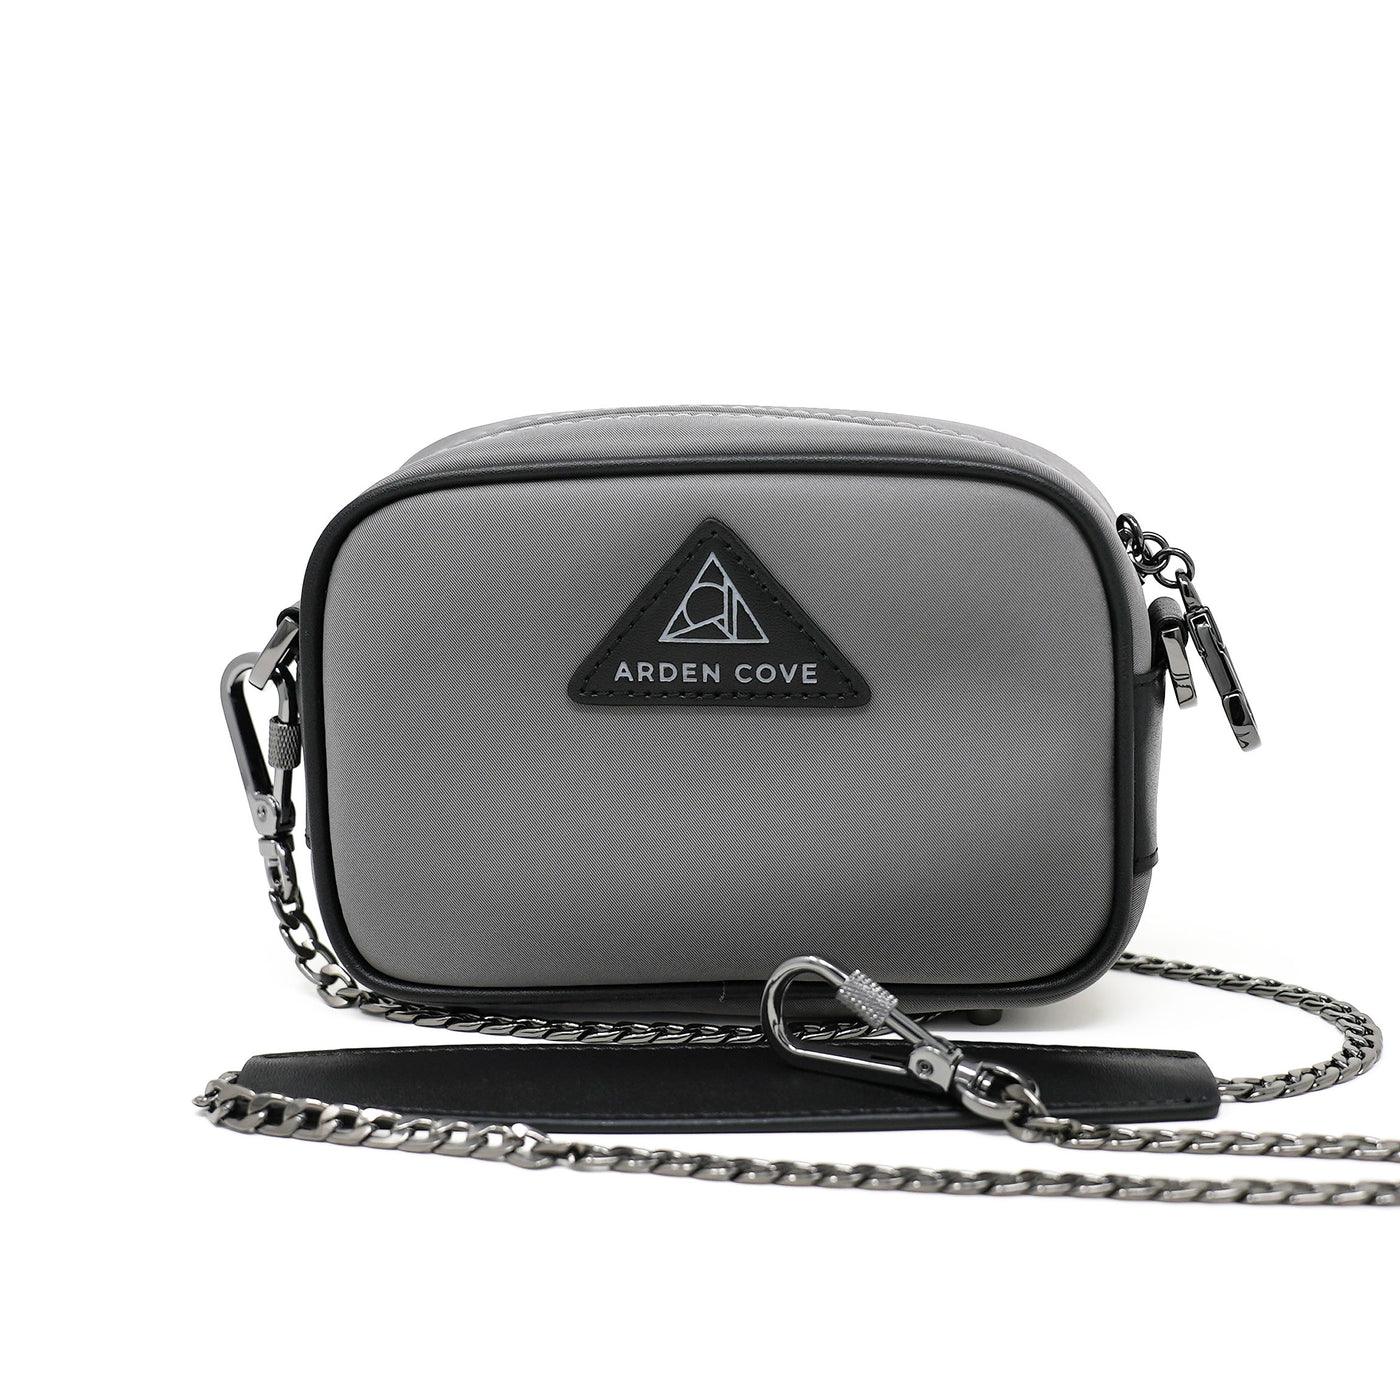 Anti-theft Water-resistant Travel Crossbody - Crissy Mini Crossbody in Grey Gunmetal with slash-resistant chain & locking clasps straps - front view - Arden Cove